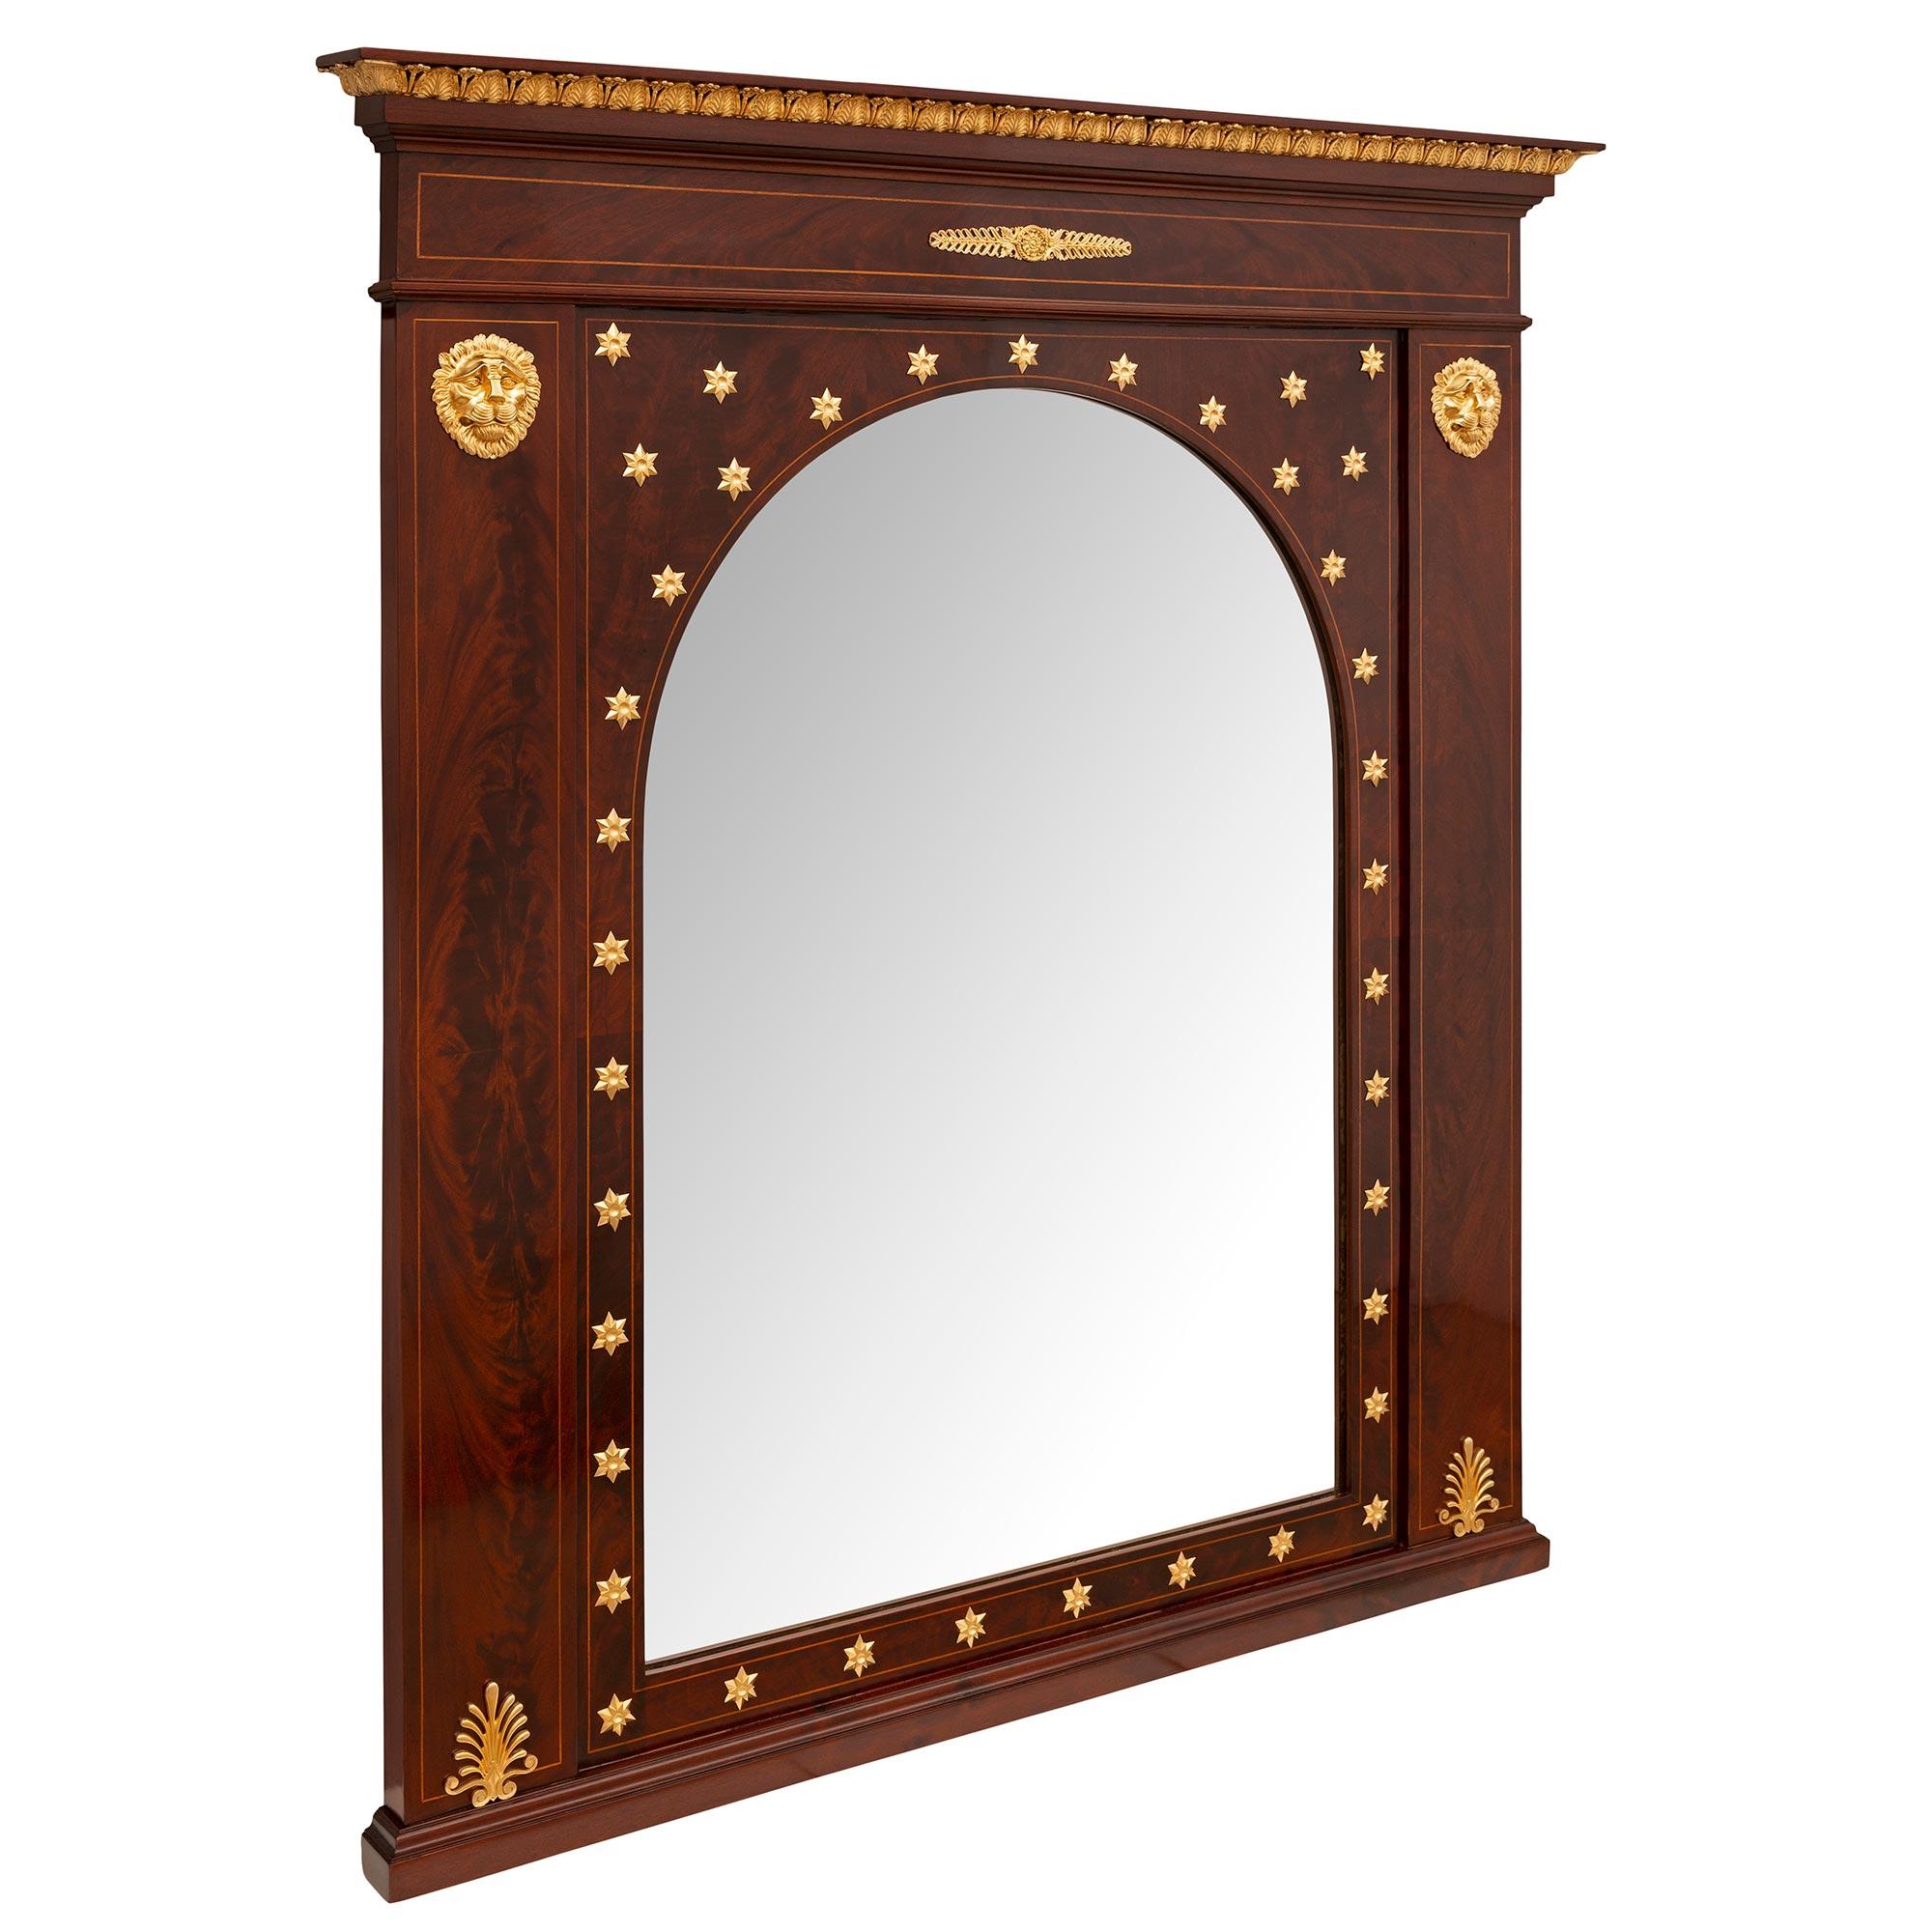 An impressive and unique French 19th century Empire st. mahogany and ormolu mirror. The mirror is raised by a straight base with a fine mottled design. The original central mirror plate displays an elegant arched shape design framed by striking most